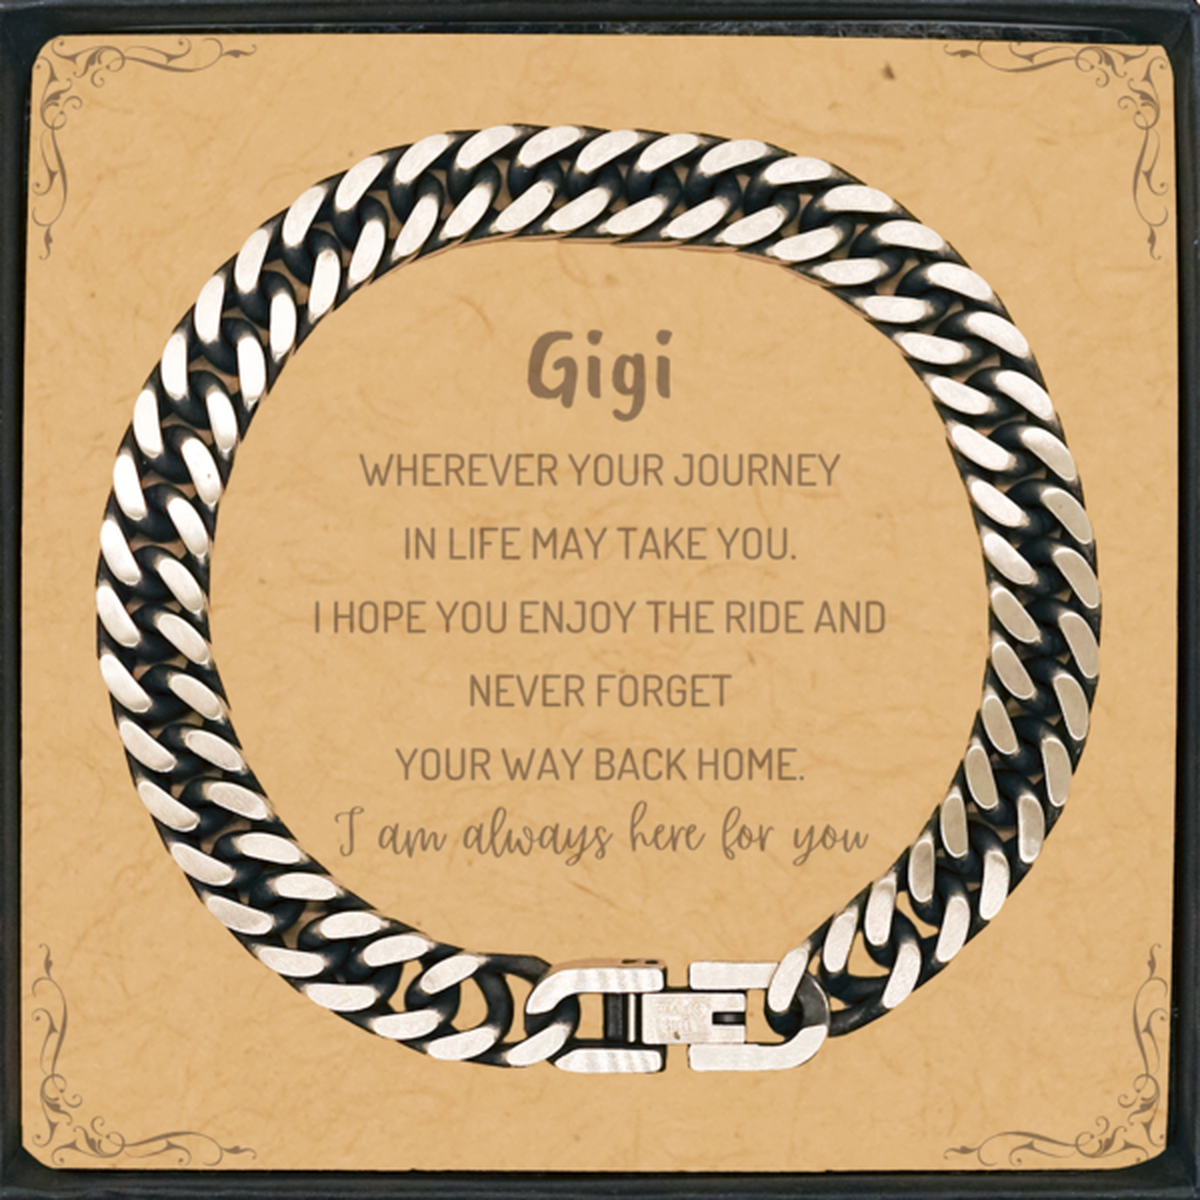 Gigi wherever your journey in life may take you, I am always here for you Gigi Cuban Link Chain Bracelet, Awesome Christmas Gifts For Gigi Message Card, Gigi Birthday Gifts for Men Women Family Loved One